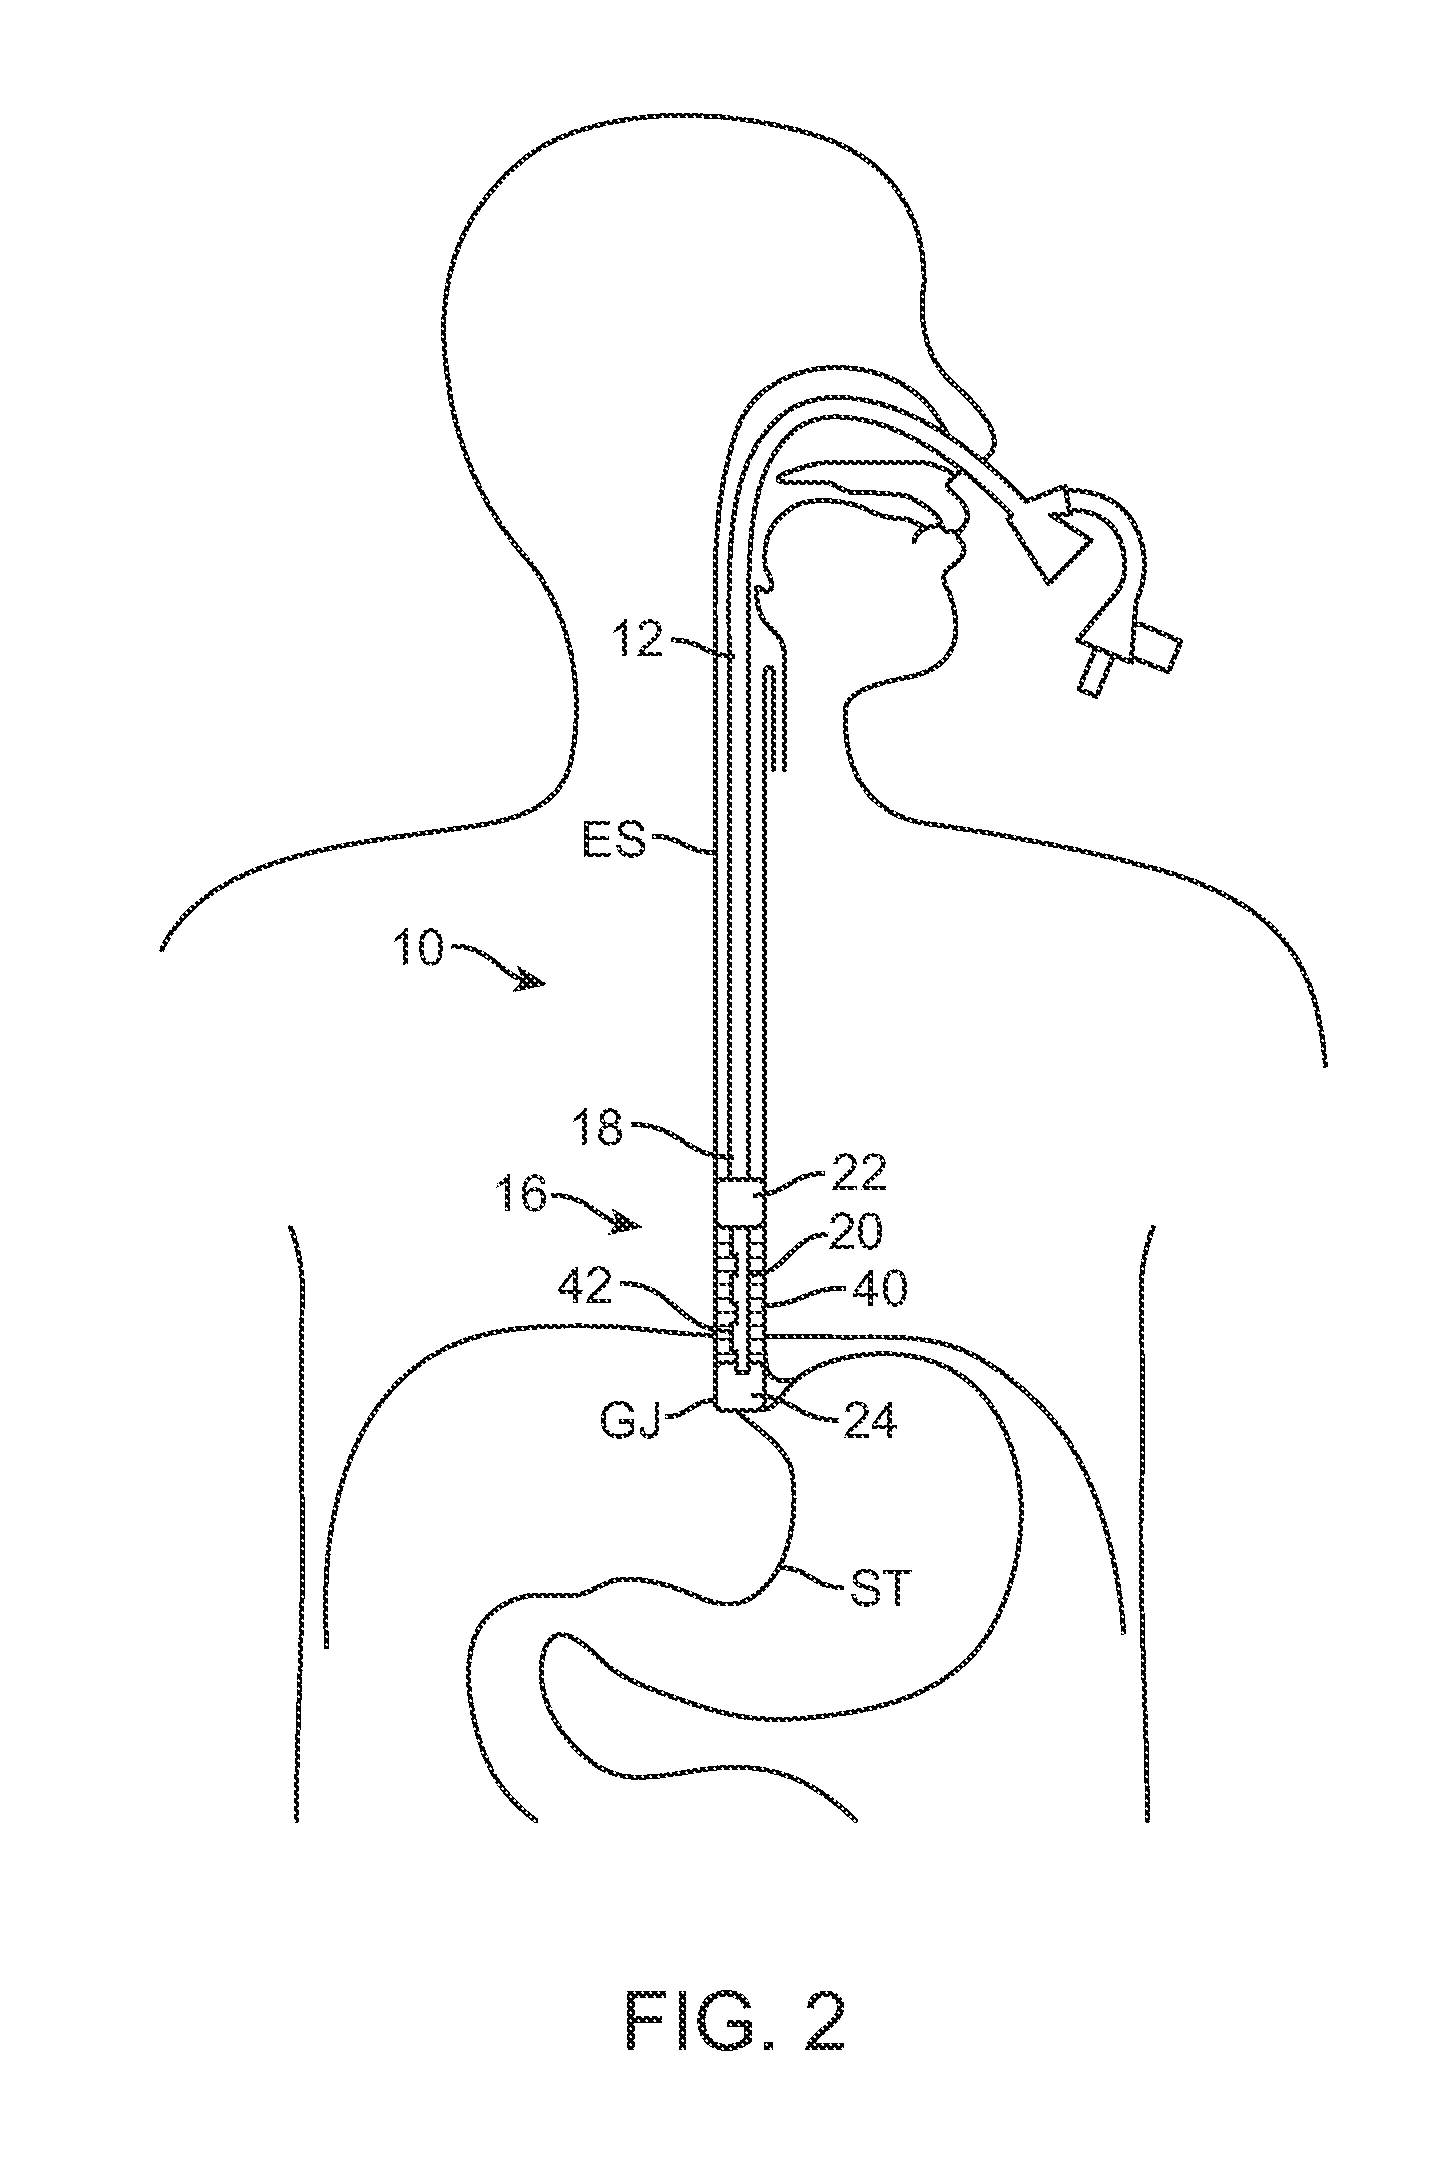 Methods and apparatus for cyrogenic treatment of a body cavity or lumen